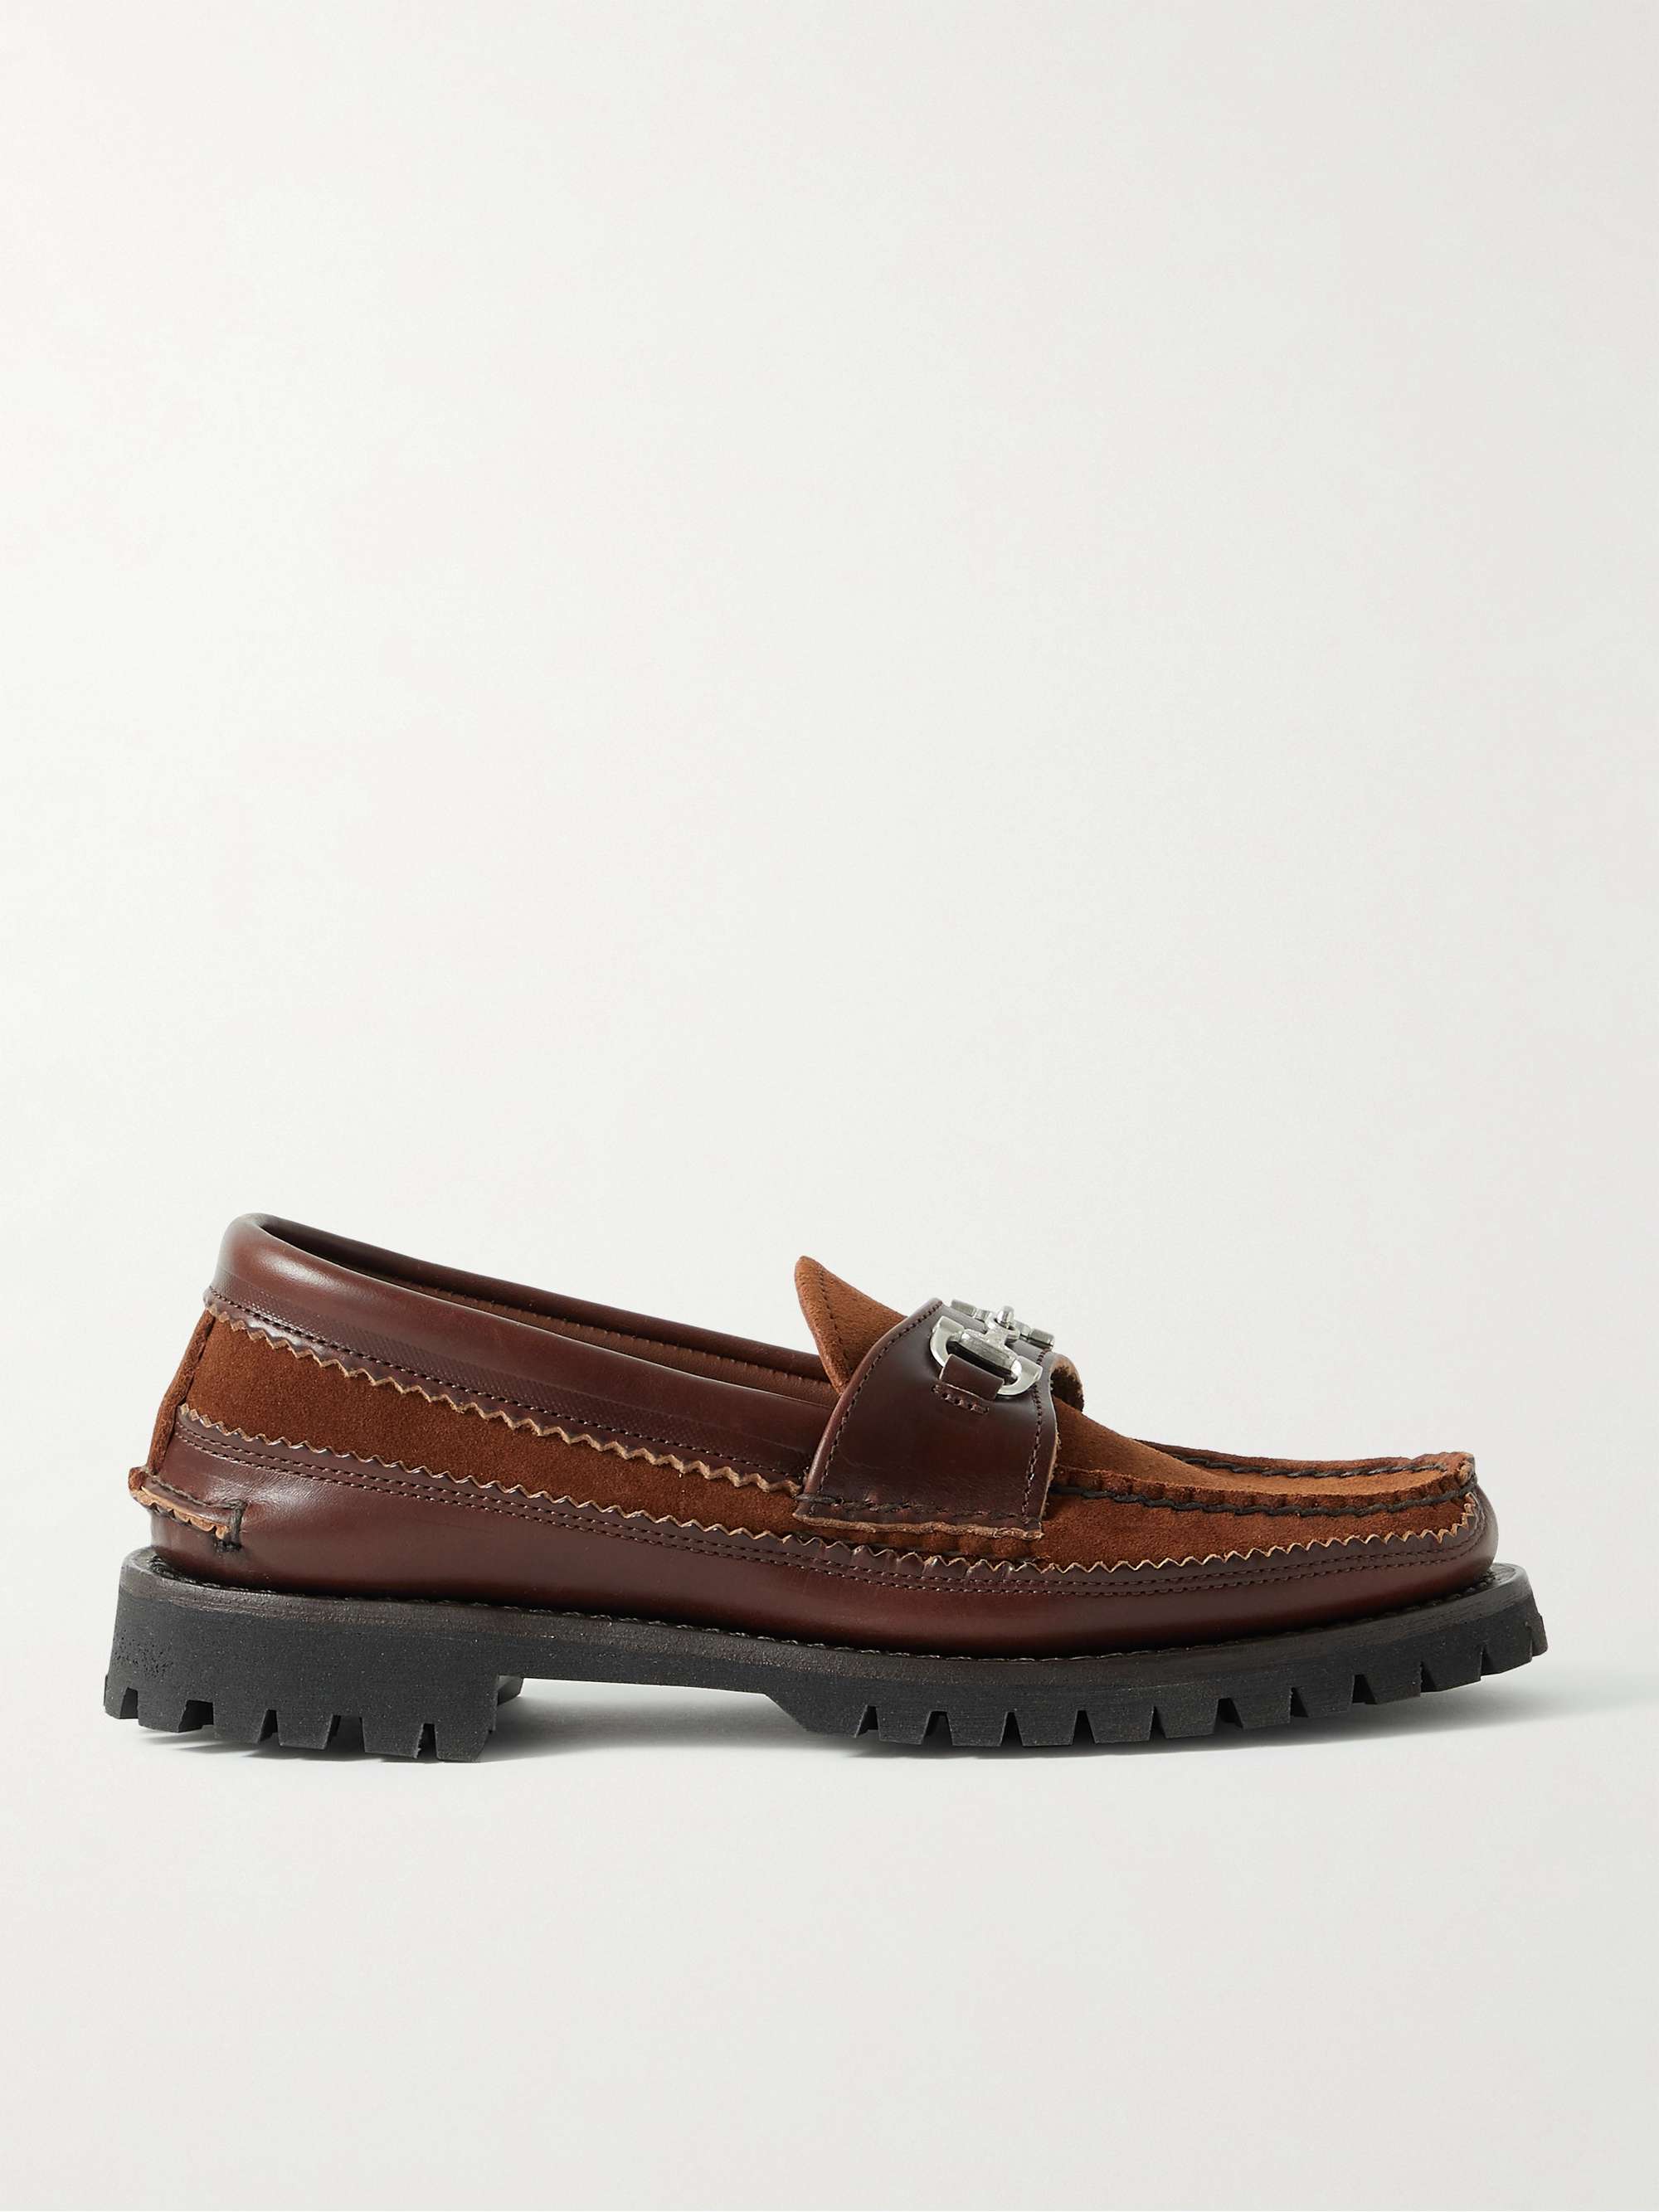 YUKETEN Horsebit Suede and Leather Loafers